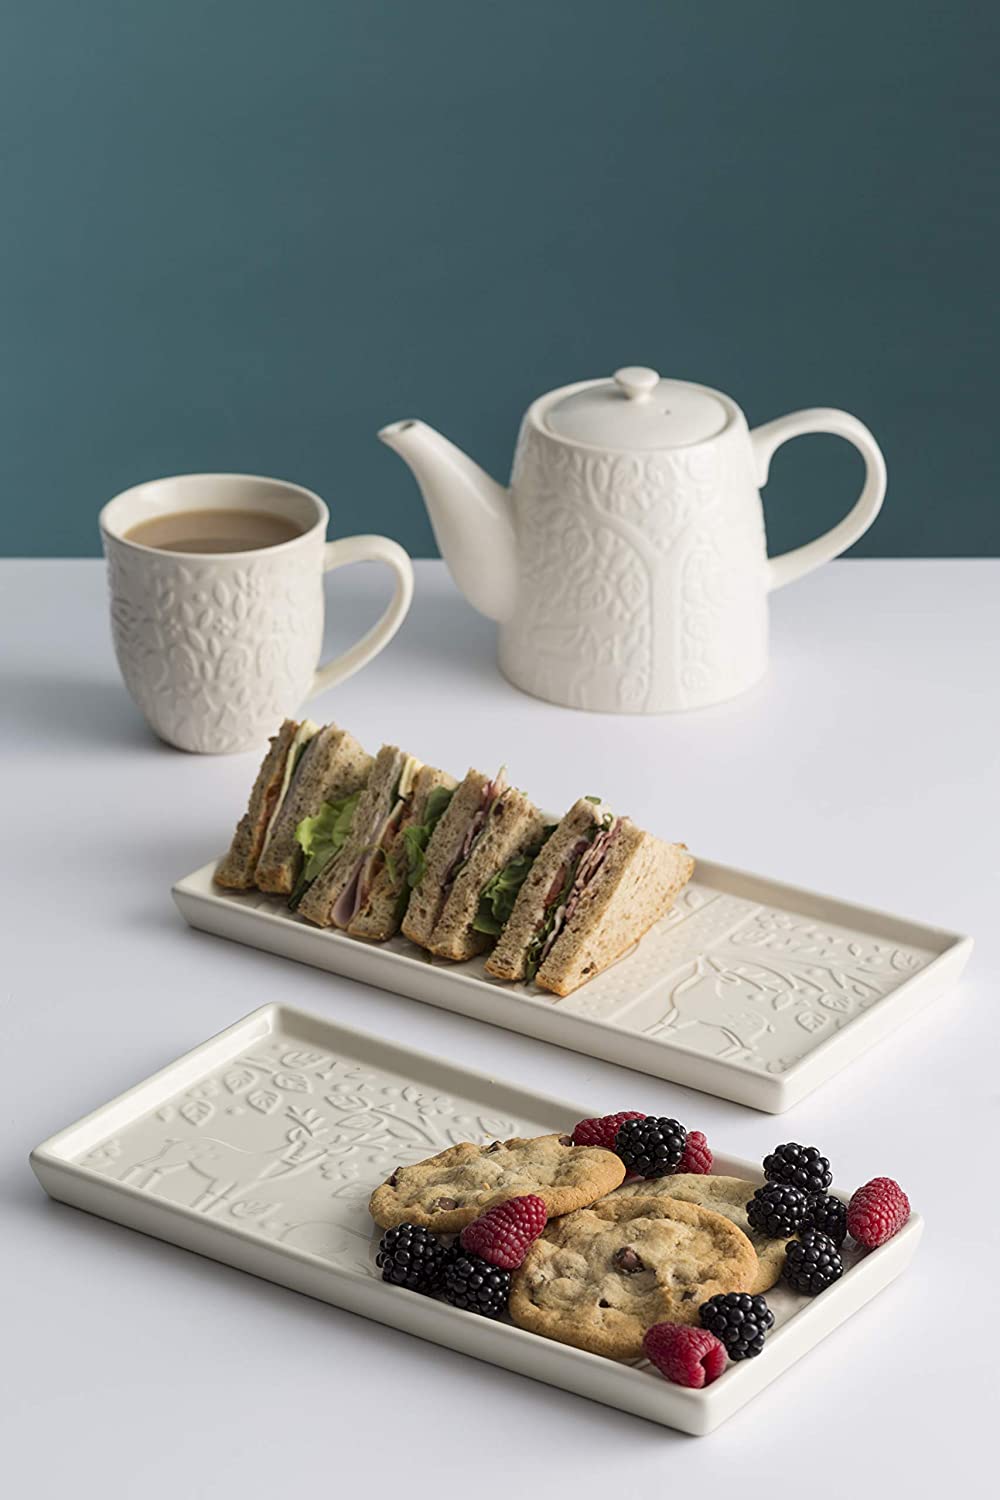 tray with cookies and berries, another tray with sandwiches, mug and teapot on white countertop.